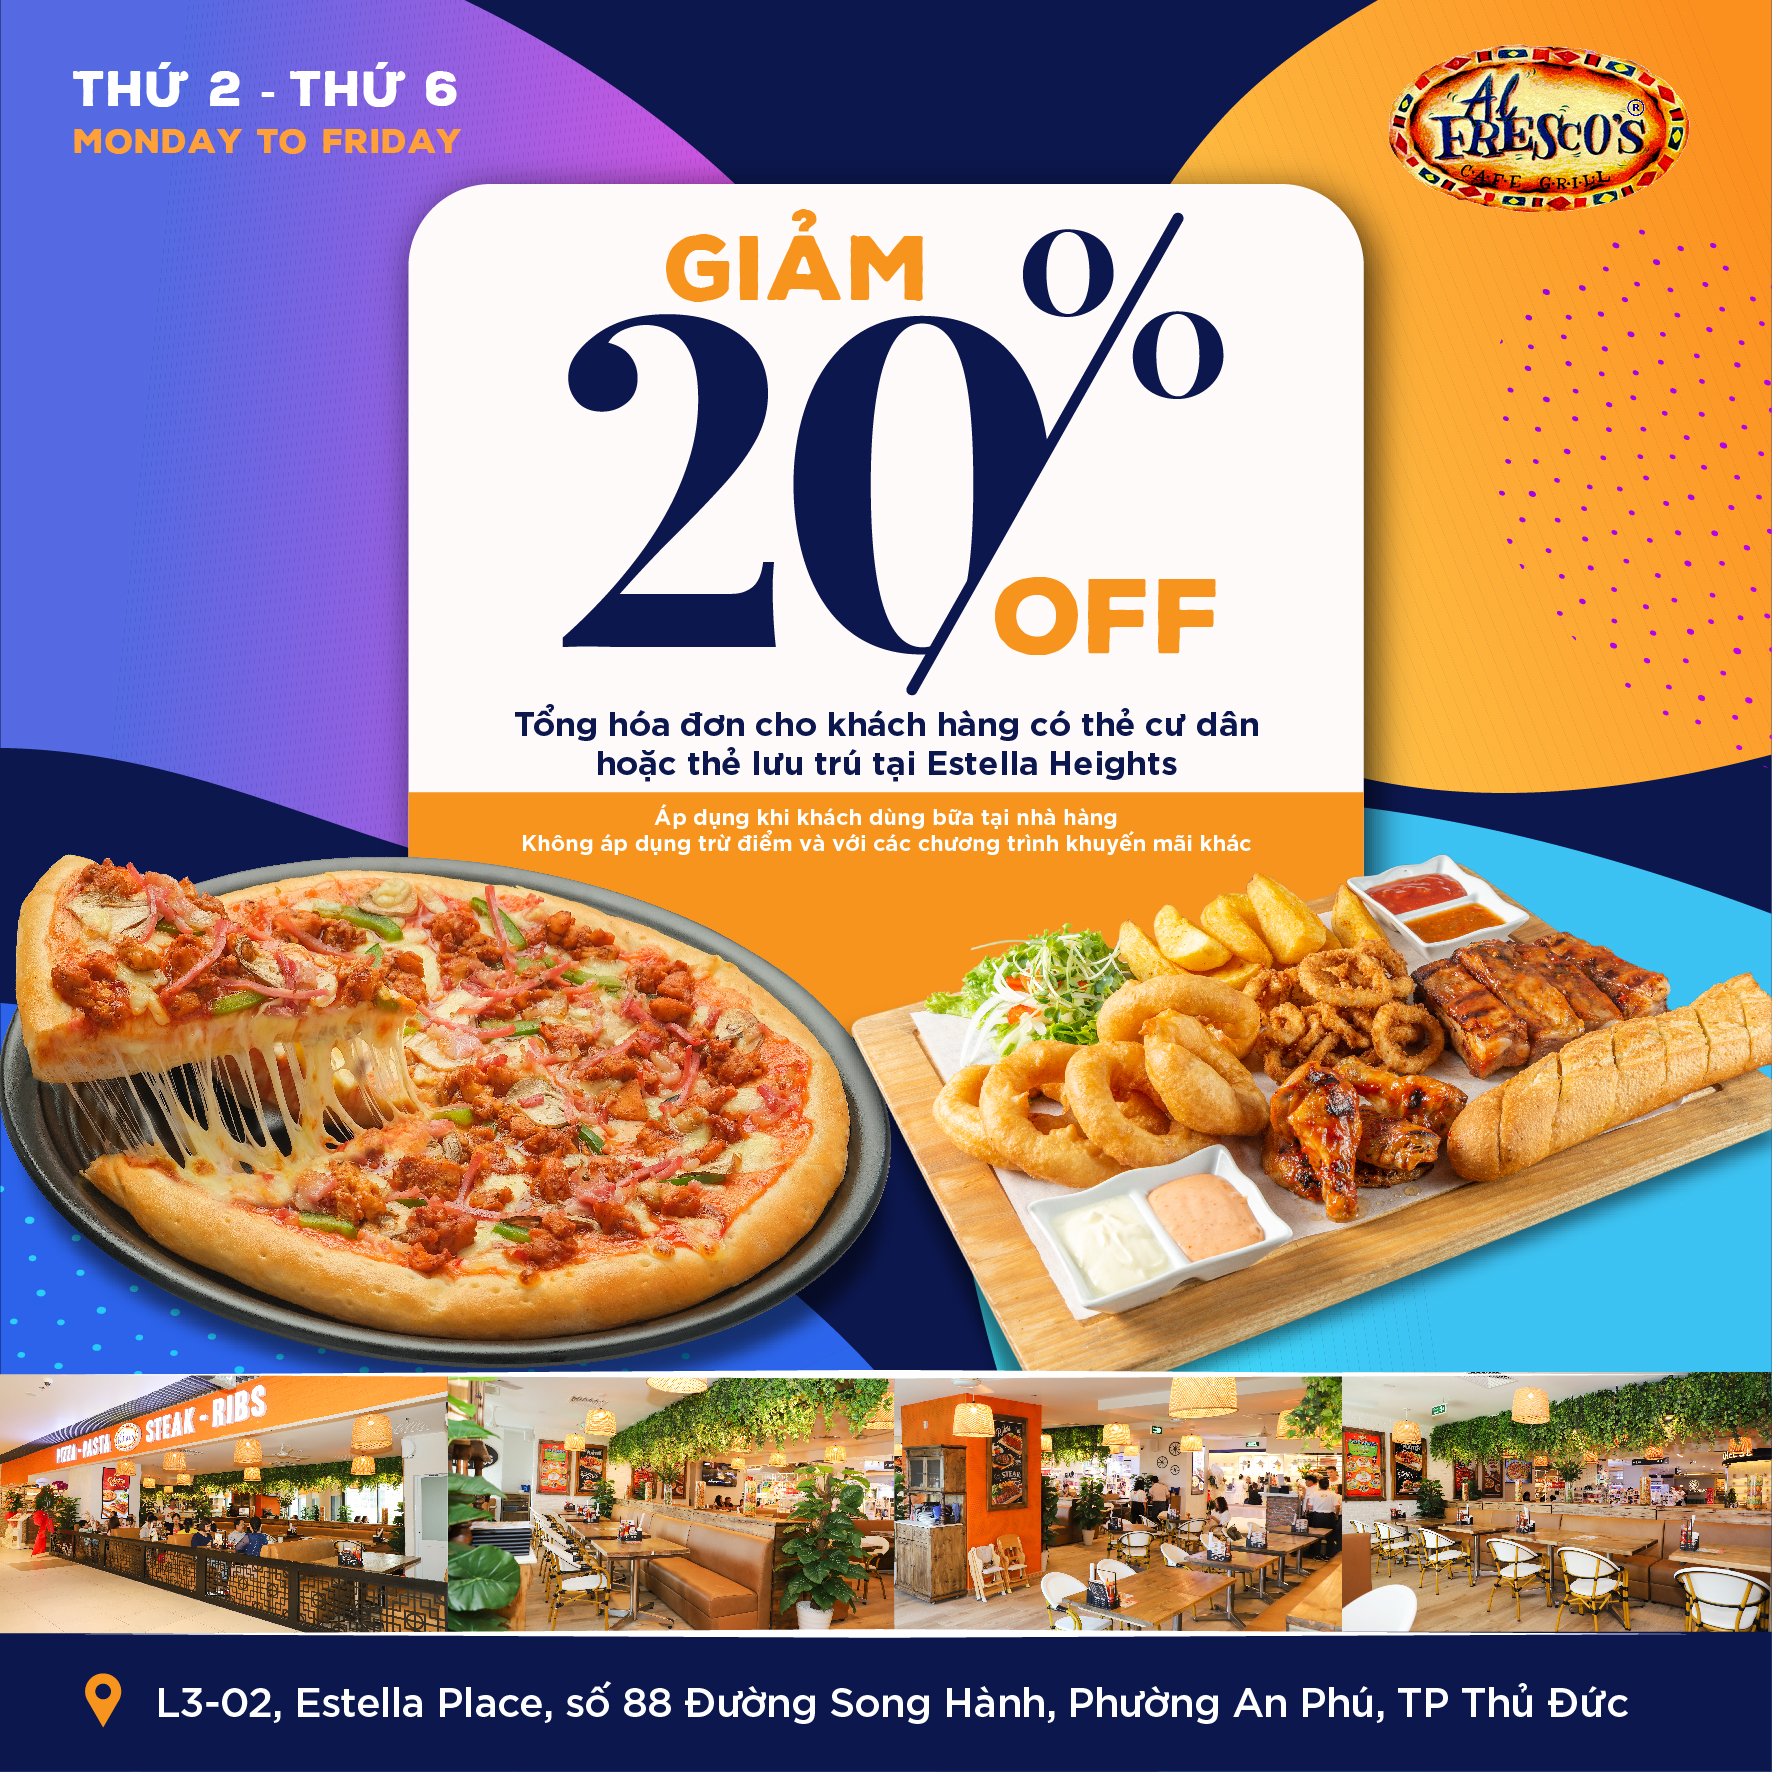 20% DISCOUNT ON THE TOTAL BILL – AN EXCLUSIVE DEAL FOR ESTELLA HEIGHTS RESIDENTS